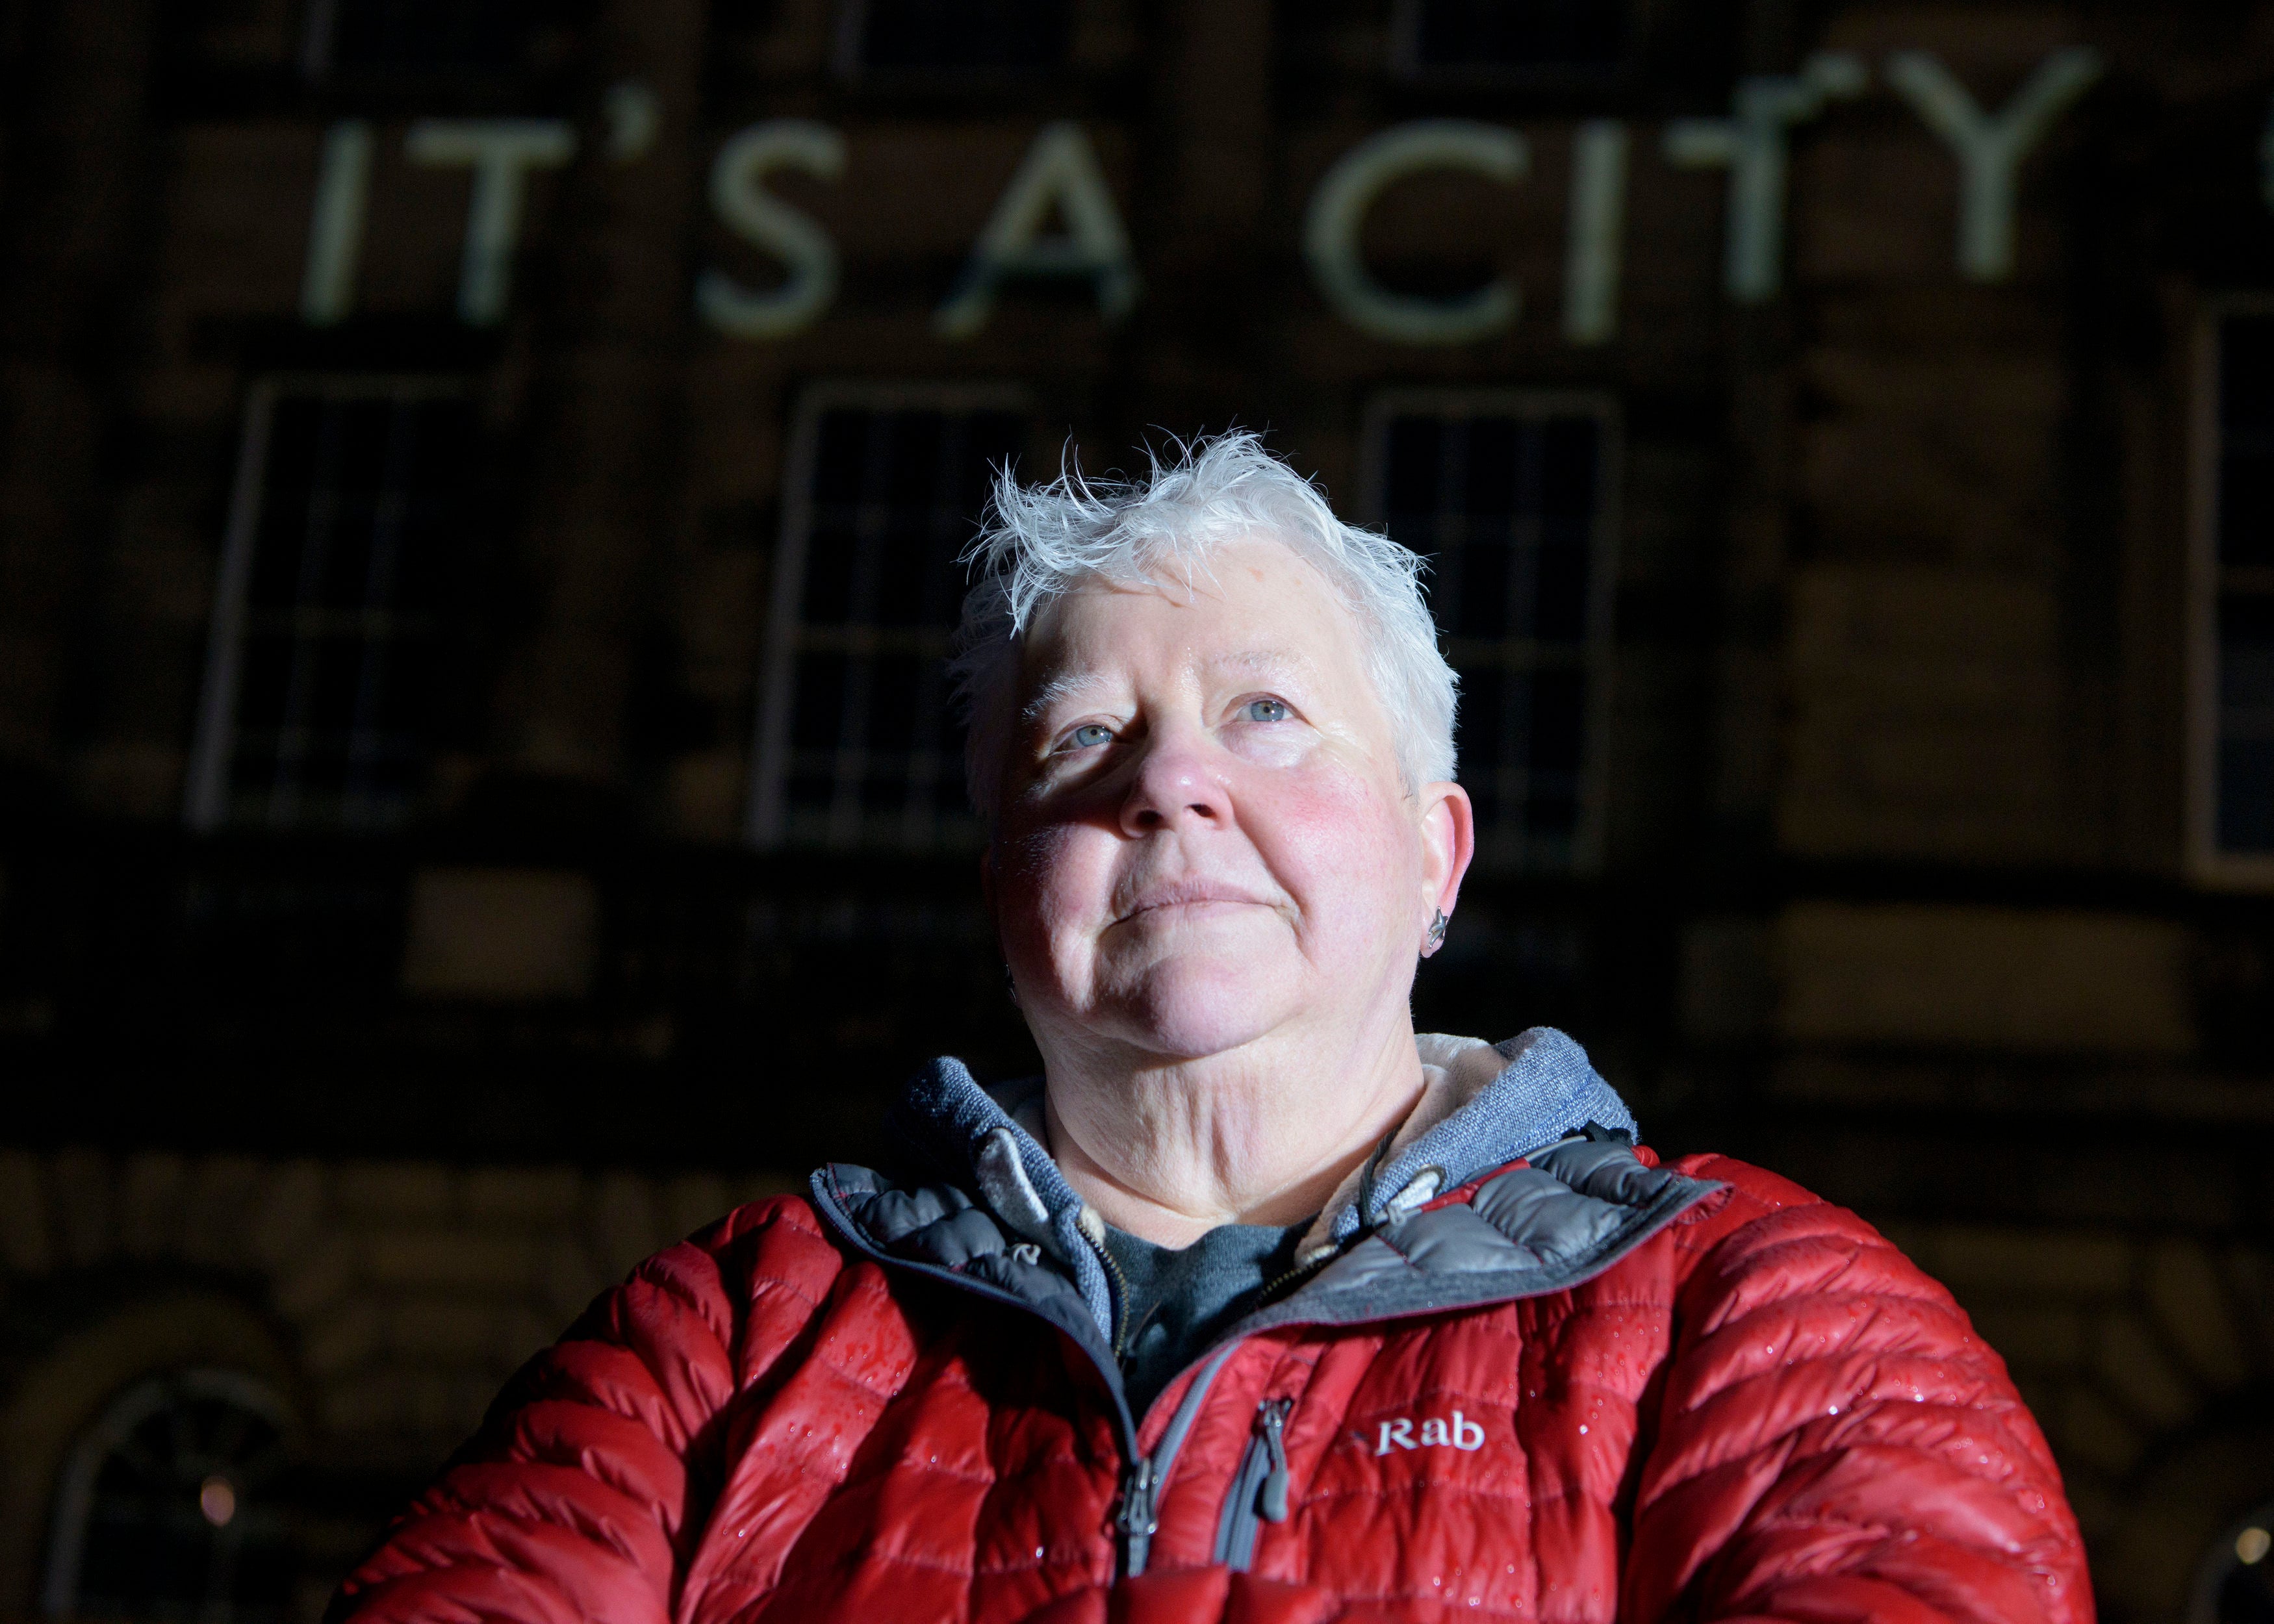 Crime writer Val McDermid has ended her lifelong support and sponsorship of Raith Rovers after the club signed David Goodwillie who was found to have raped a woman in 2011 (John Linton/PA)